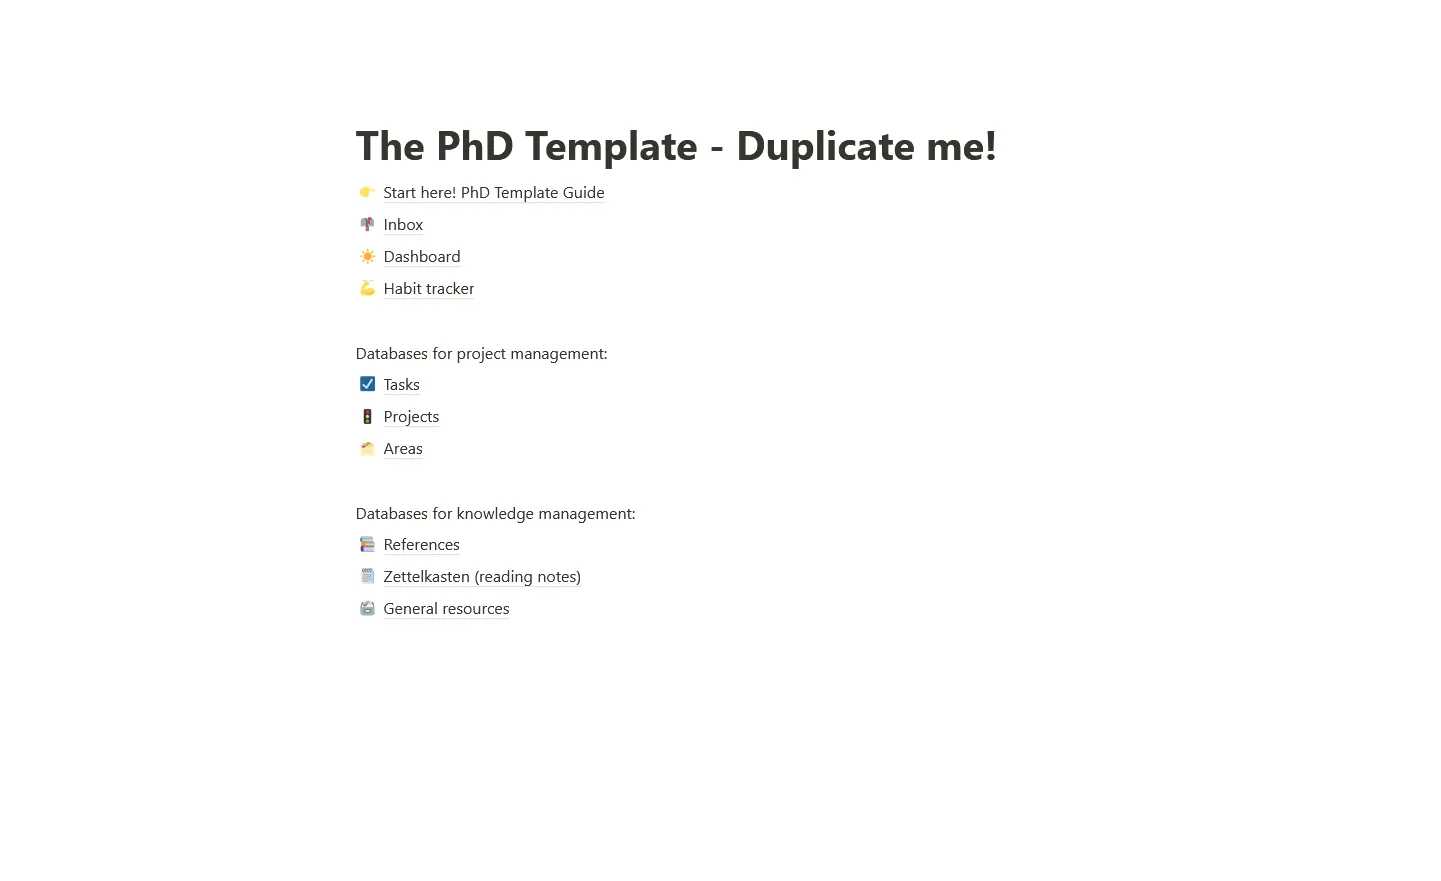 Workspace Template for Phd Students image